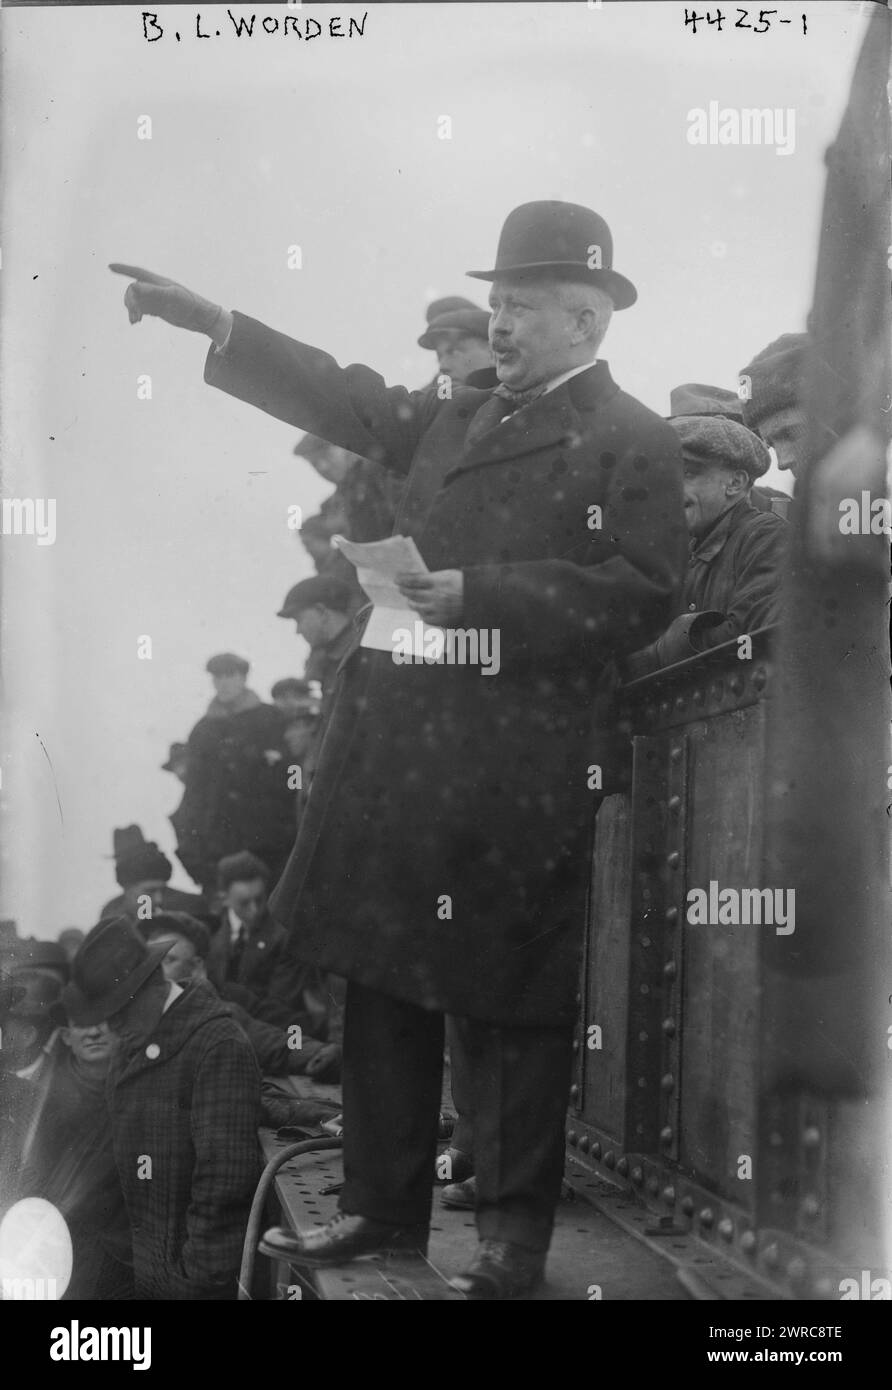 B.L. Worden, Photograph shows General Manager of the Submarine Boat Corporation, Mr. B. L. Worden (president of the Lackawanna Bridge Co.) at the Newark Bay Shipyard, Kearny, New Jersey, during a ceremony on December 20, 1917 marking the first rivet driven into 'the first standardized structural steel ship ever built.', 1917 Dec. 20, Glass negatives, 1 negative: glass Stock Photo